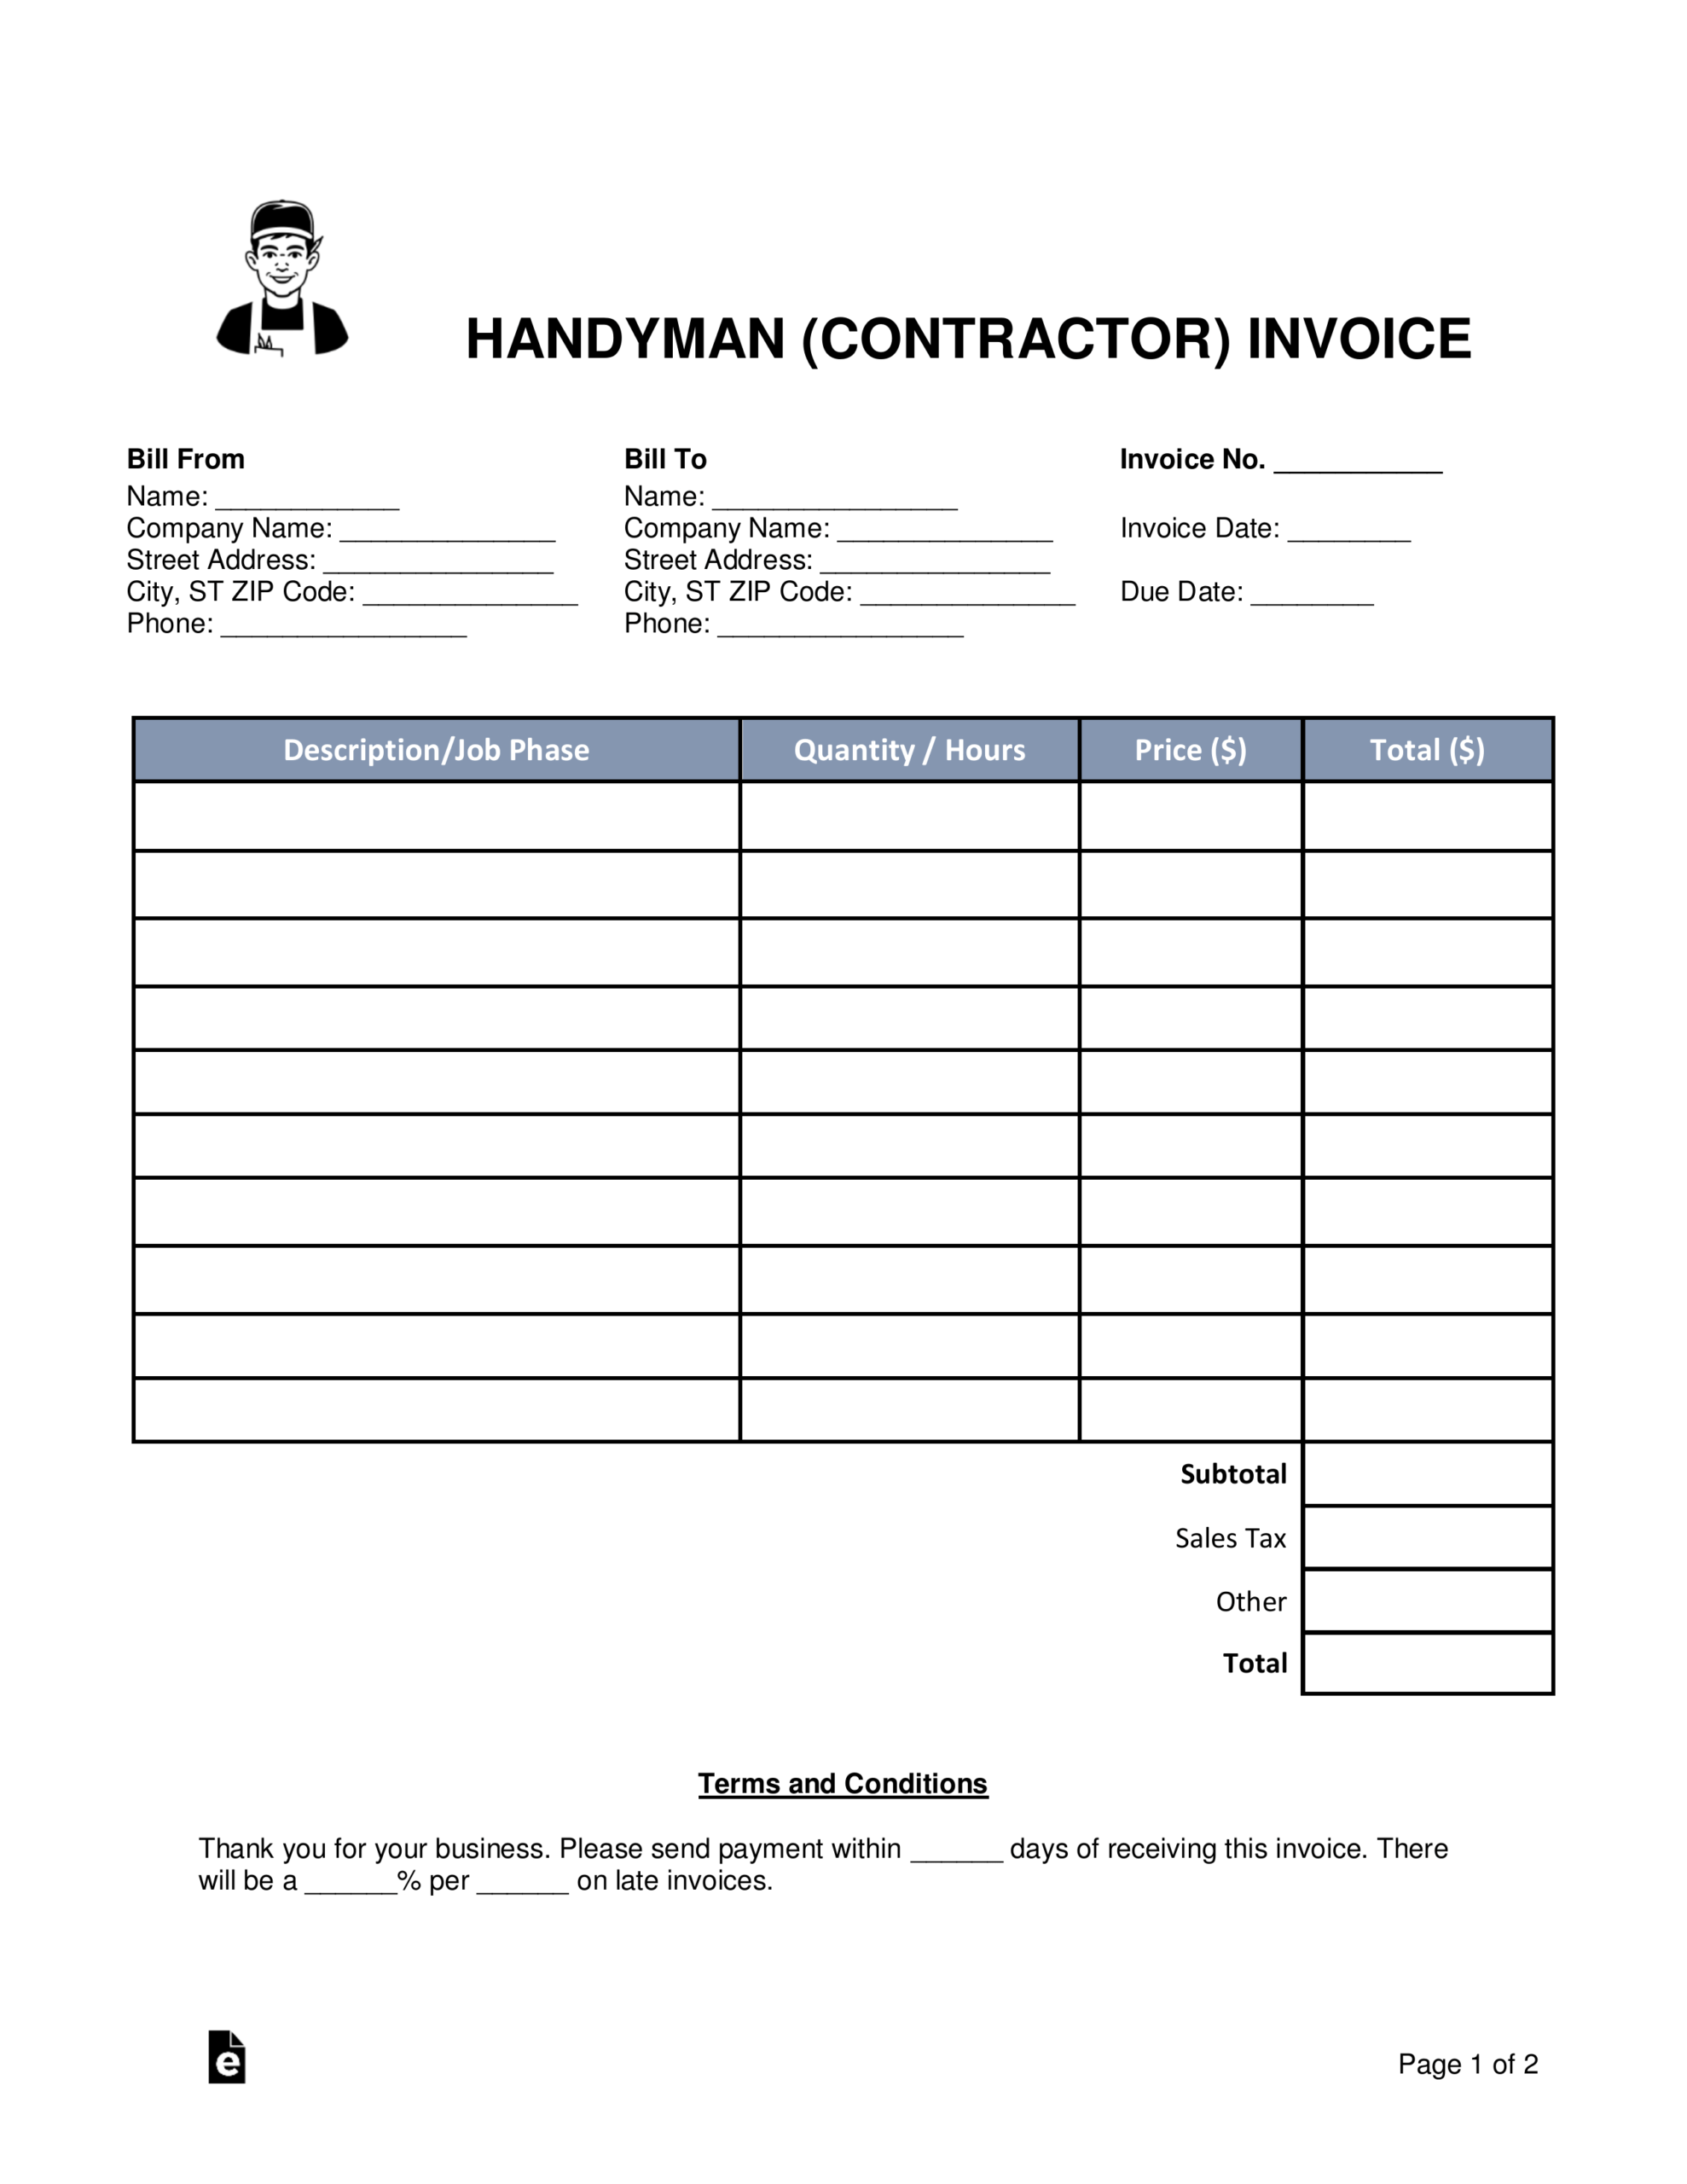 Free Handyman (Contractor) Invoice Template – Word | Pdf Intended For Contractor Invoices Templates